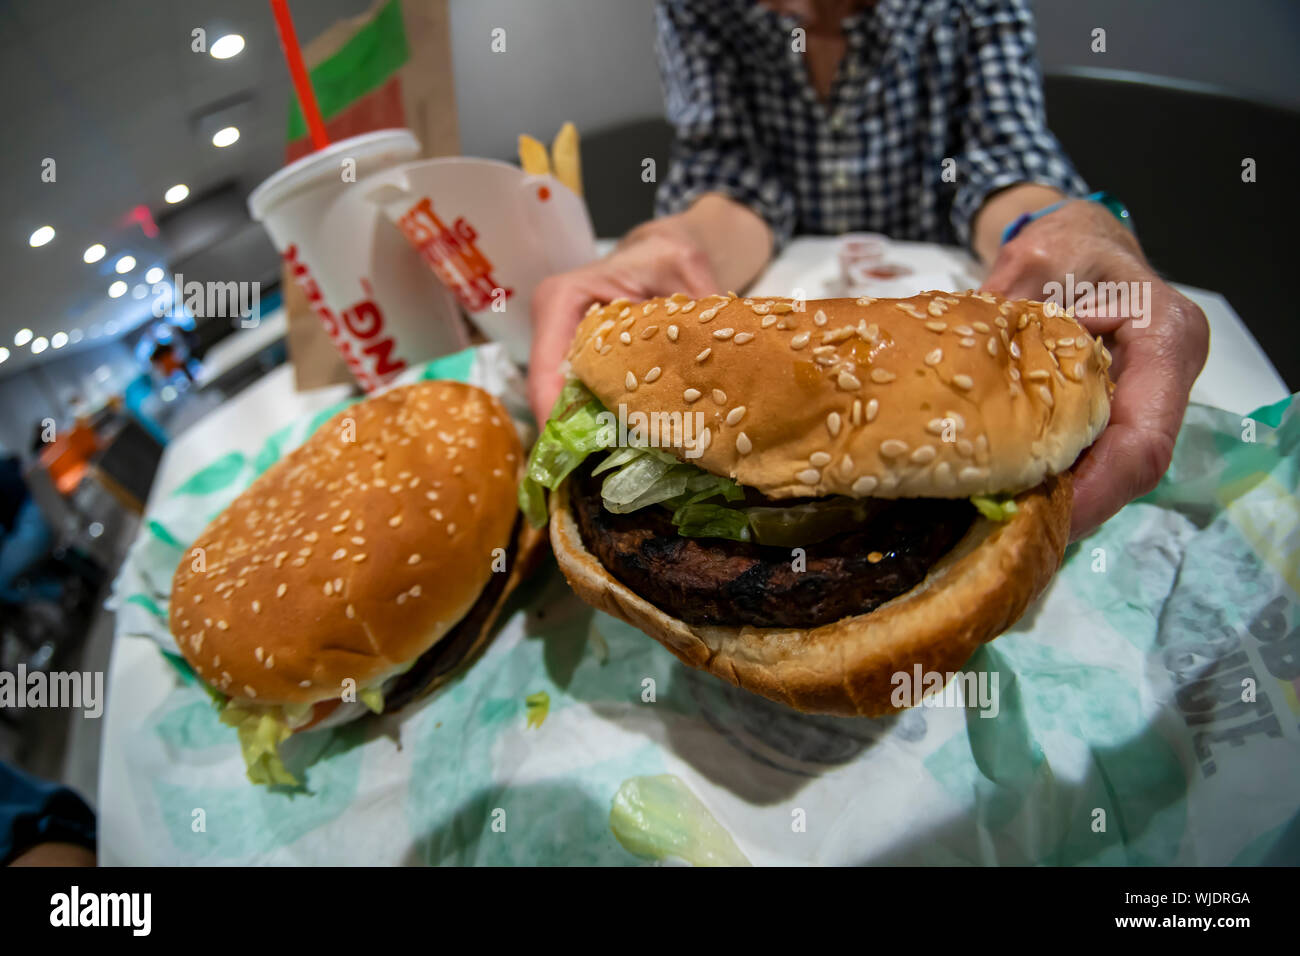 A diner enjoys a Burger King Impossible Whopper, a meatless ground beef  sandwich, in a Burger King restaurant in New York on Tuesday, August 27, 2019. The new menu item uses 1/4 pound of plant-based food made by Impossible Foods. (© Richard B. Levine) Stock Photo